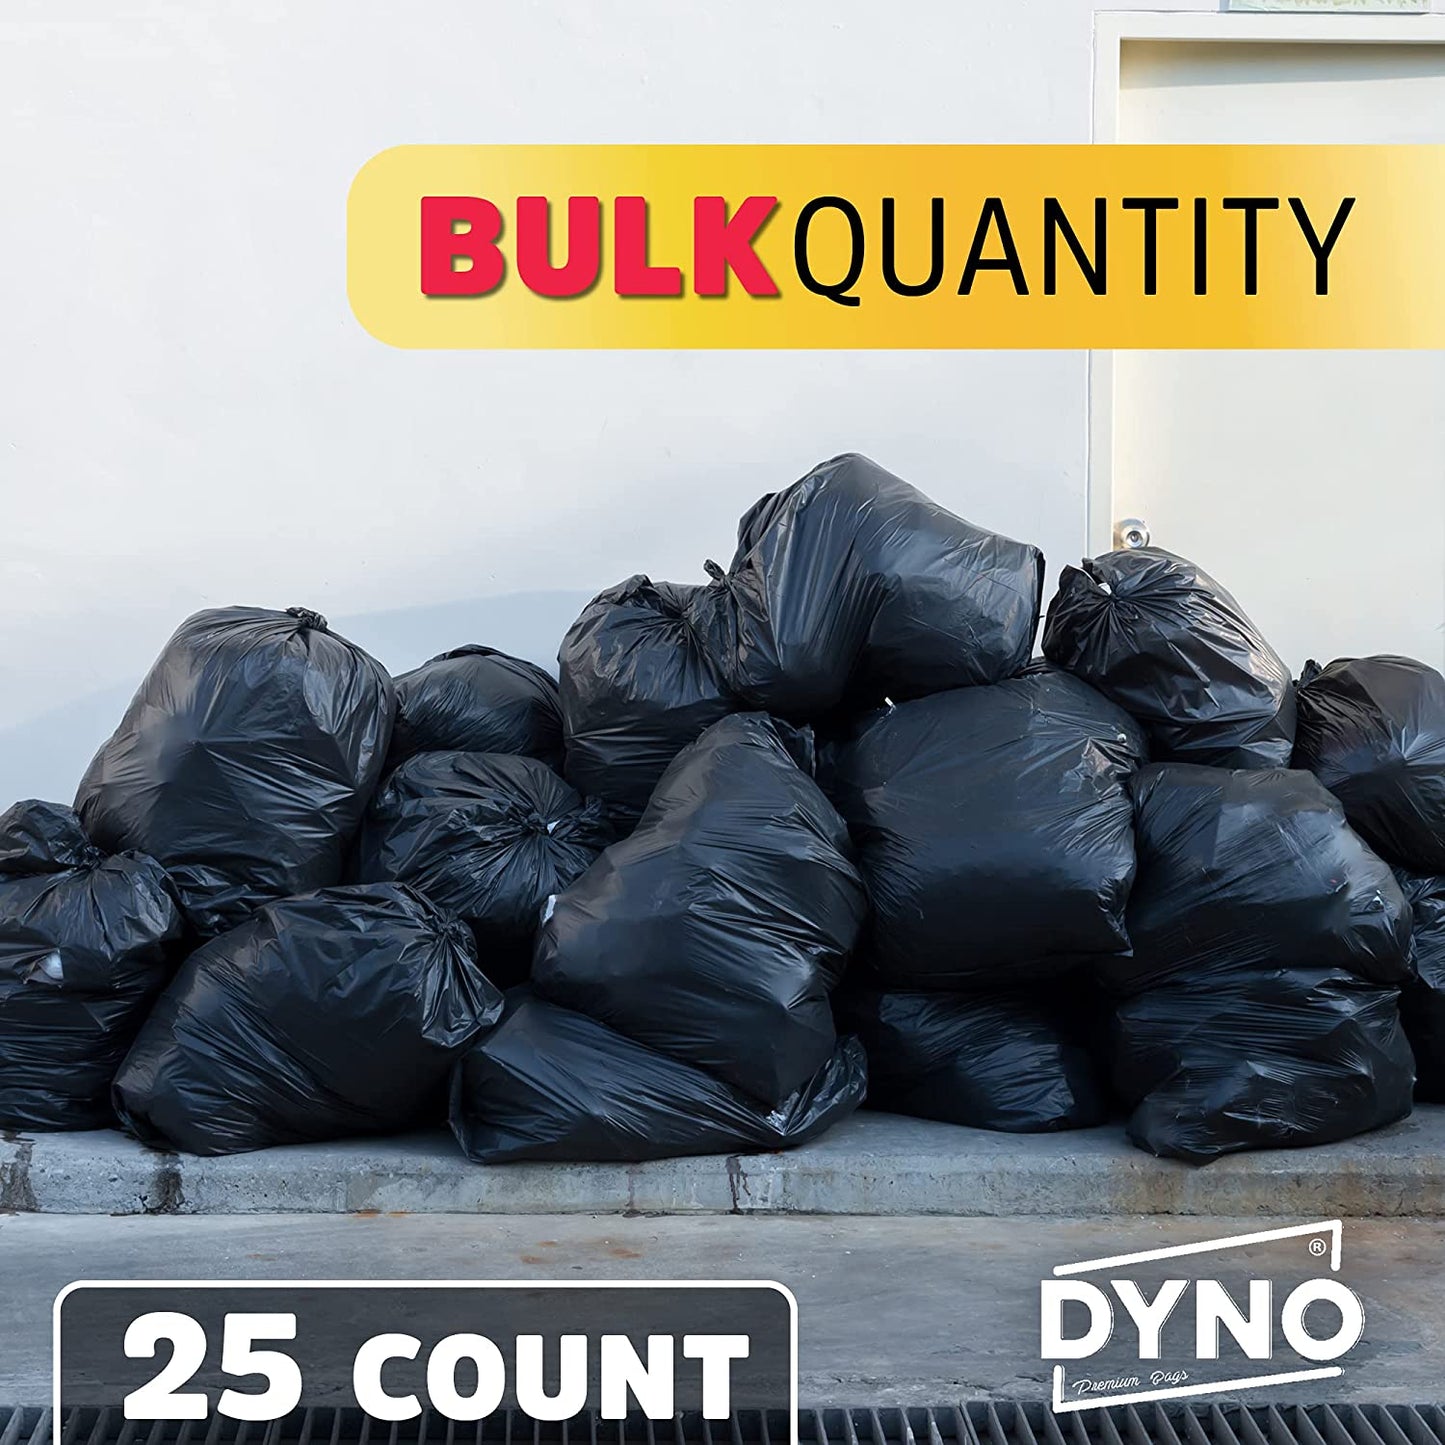 Dyno Products Online 95-96-Gallon, 1.5 Mil Thick Heavy-Duty Black Trash Bags - 25 Count Extra Large Plastic Garbage Liners Fit Huge Cans for Home Garden Lawn Yard Recycling Construction & Commercial Use